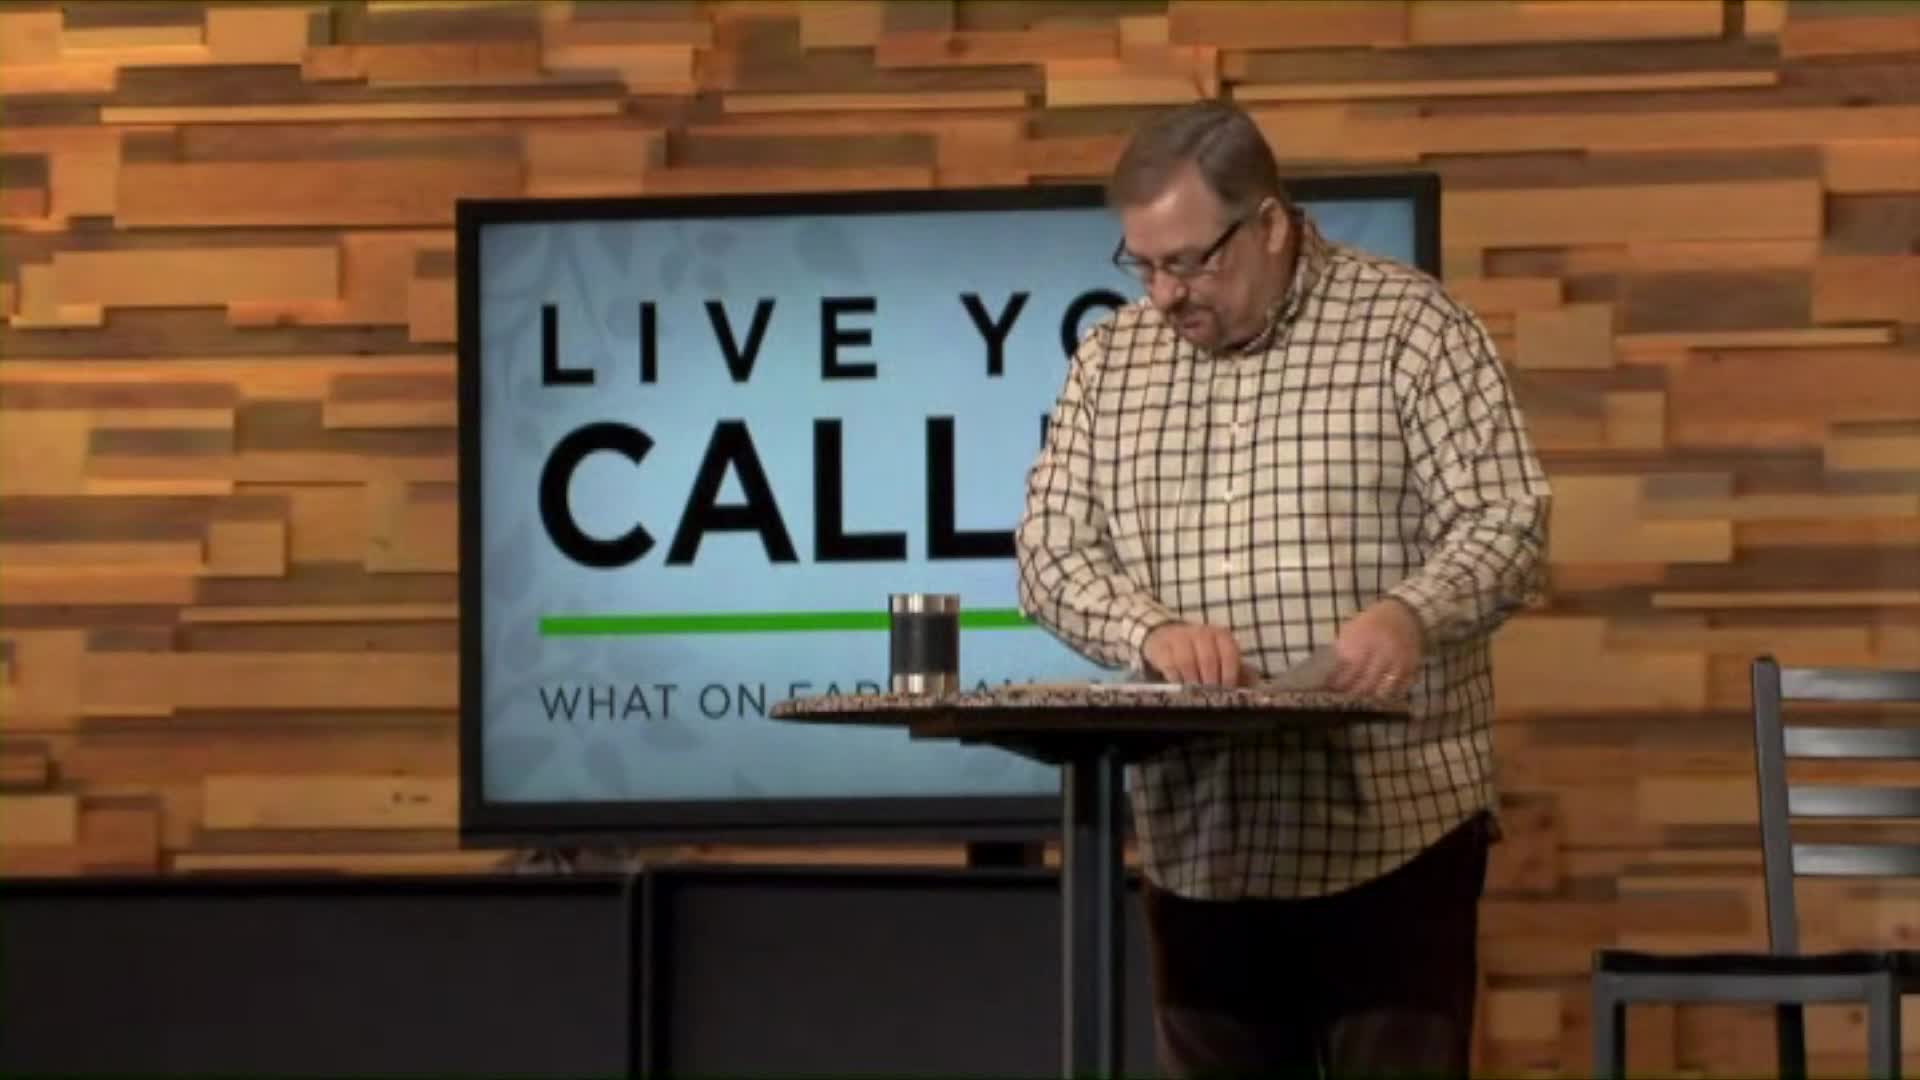 How Can I Learn to be Unselfish? (Live Your Calling)